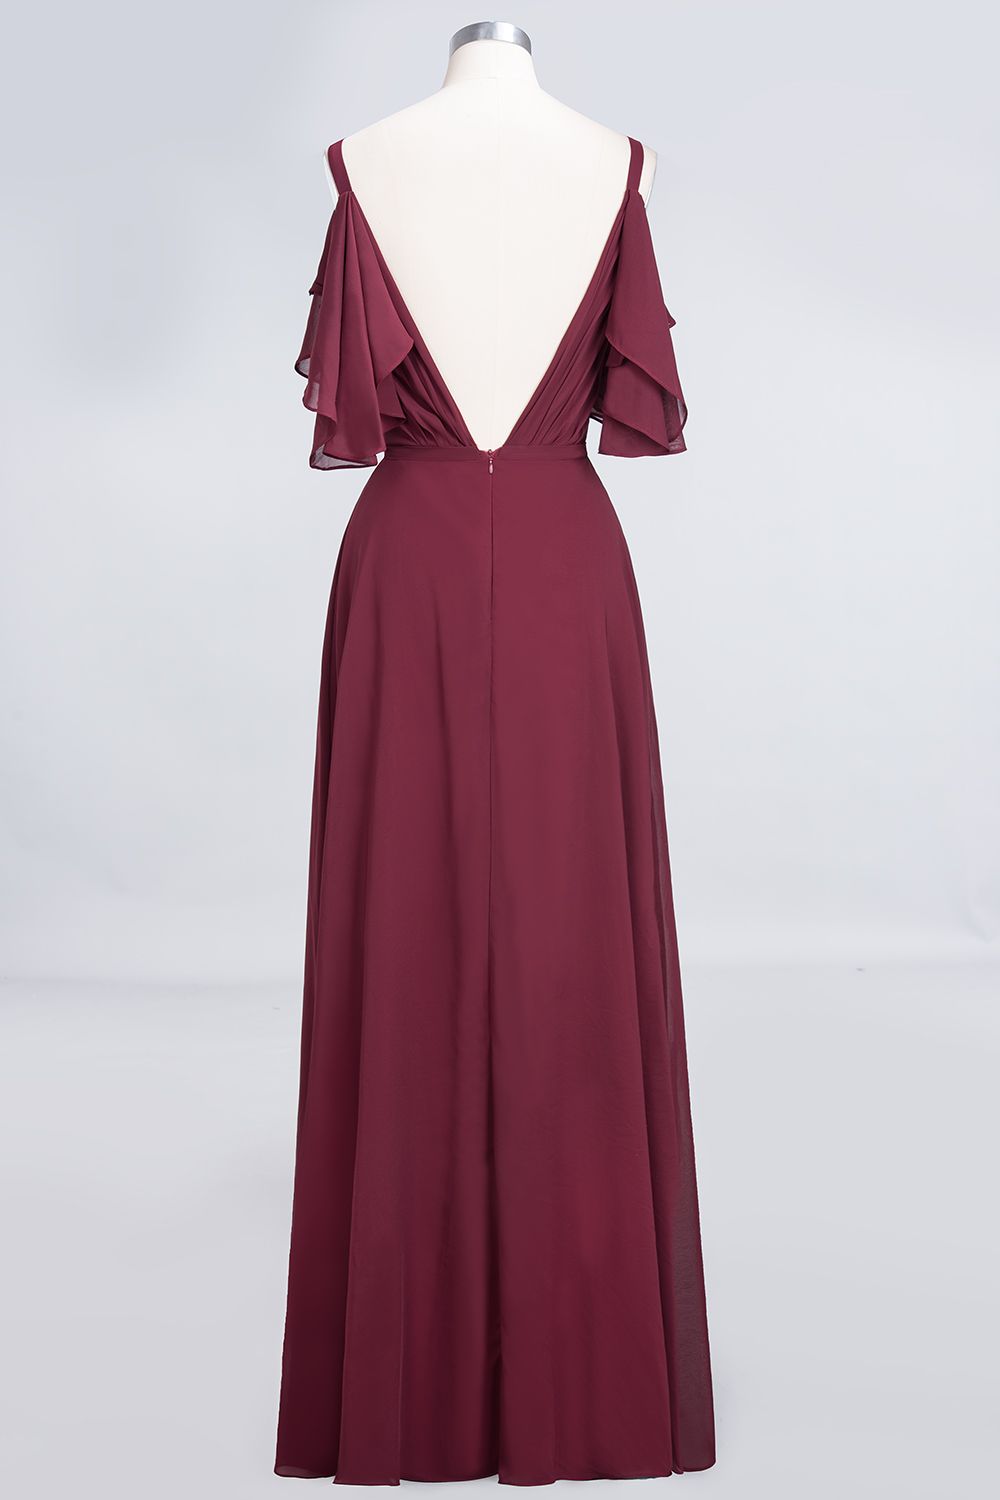 Modest Cold-shoulder Crinkle Chiffon Long Bridesmaid Dress with Pearls-27dress